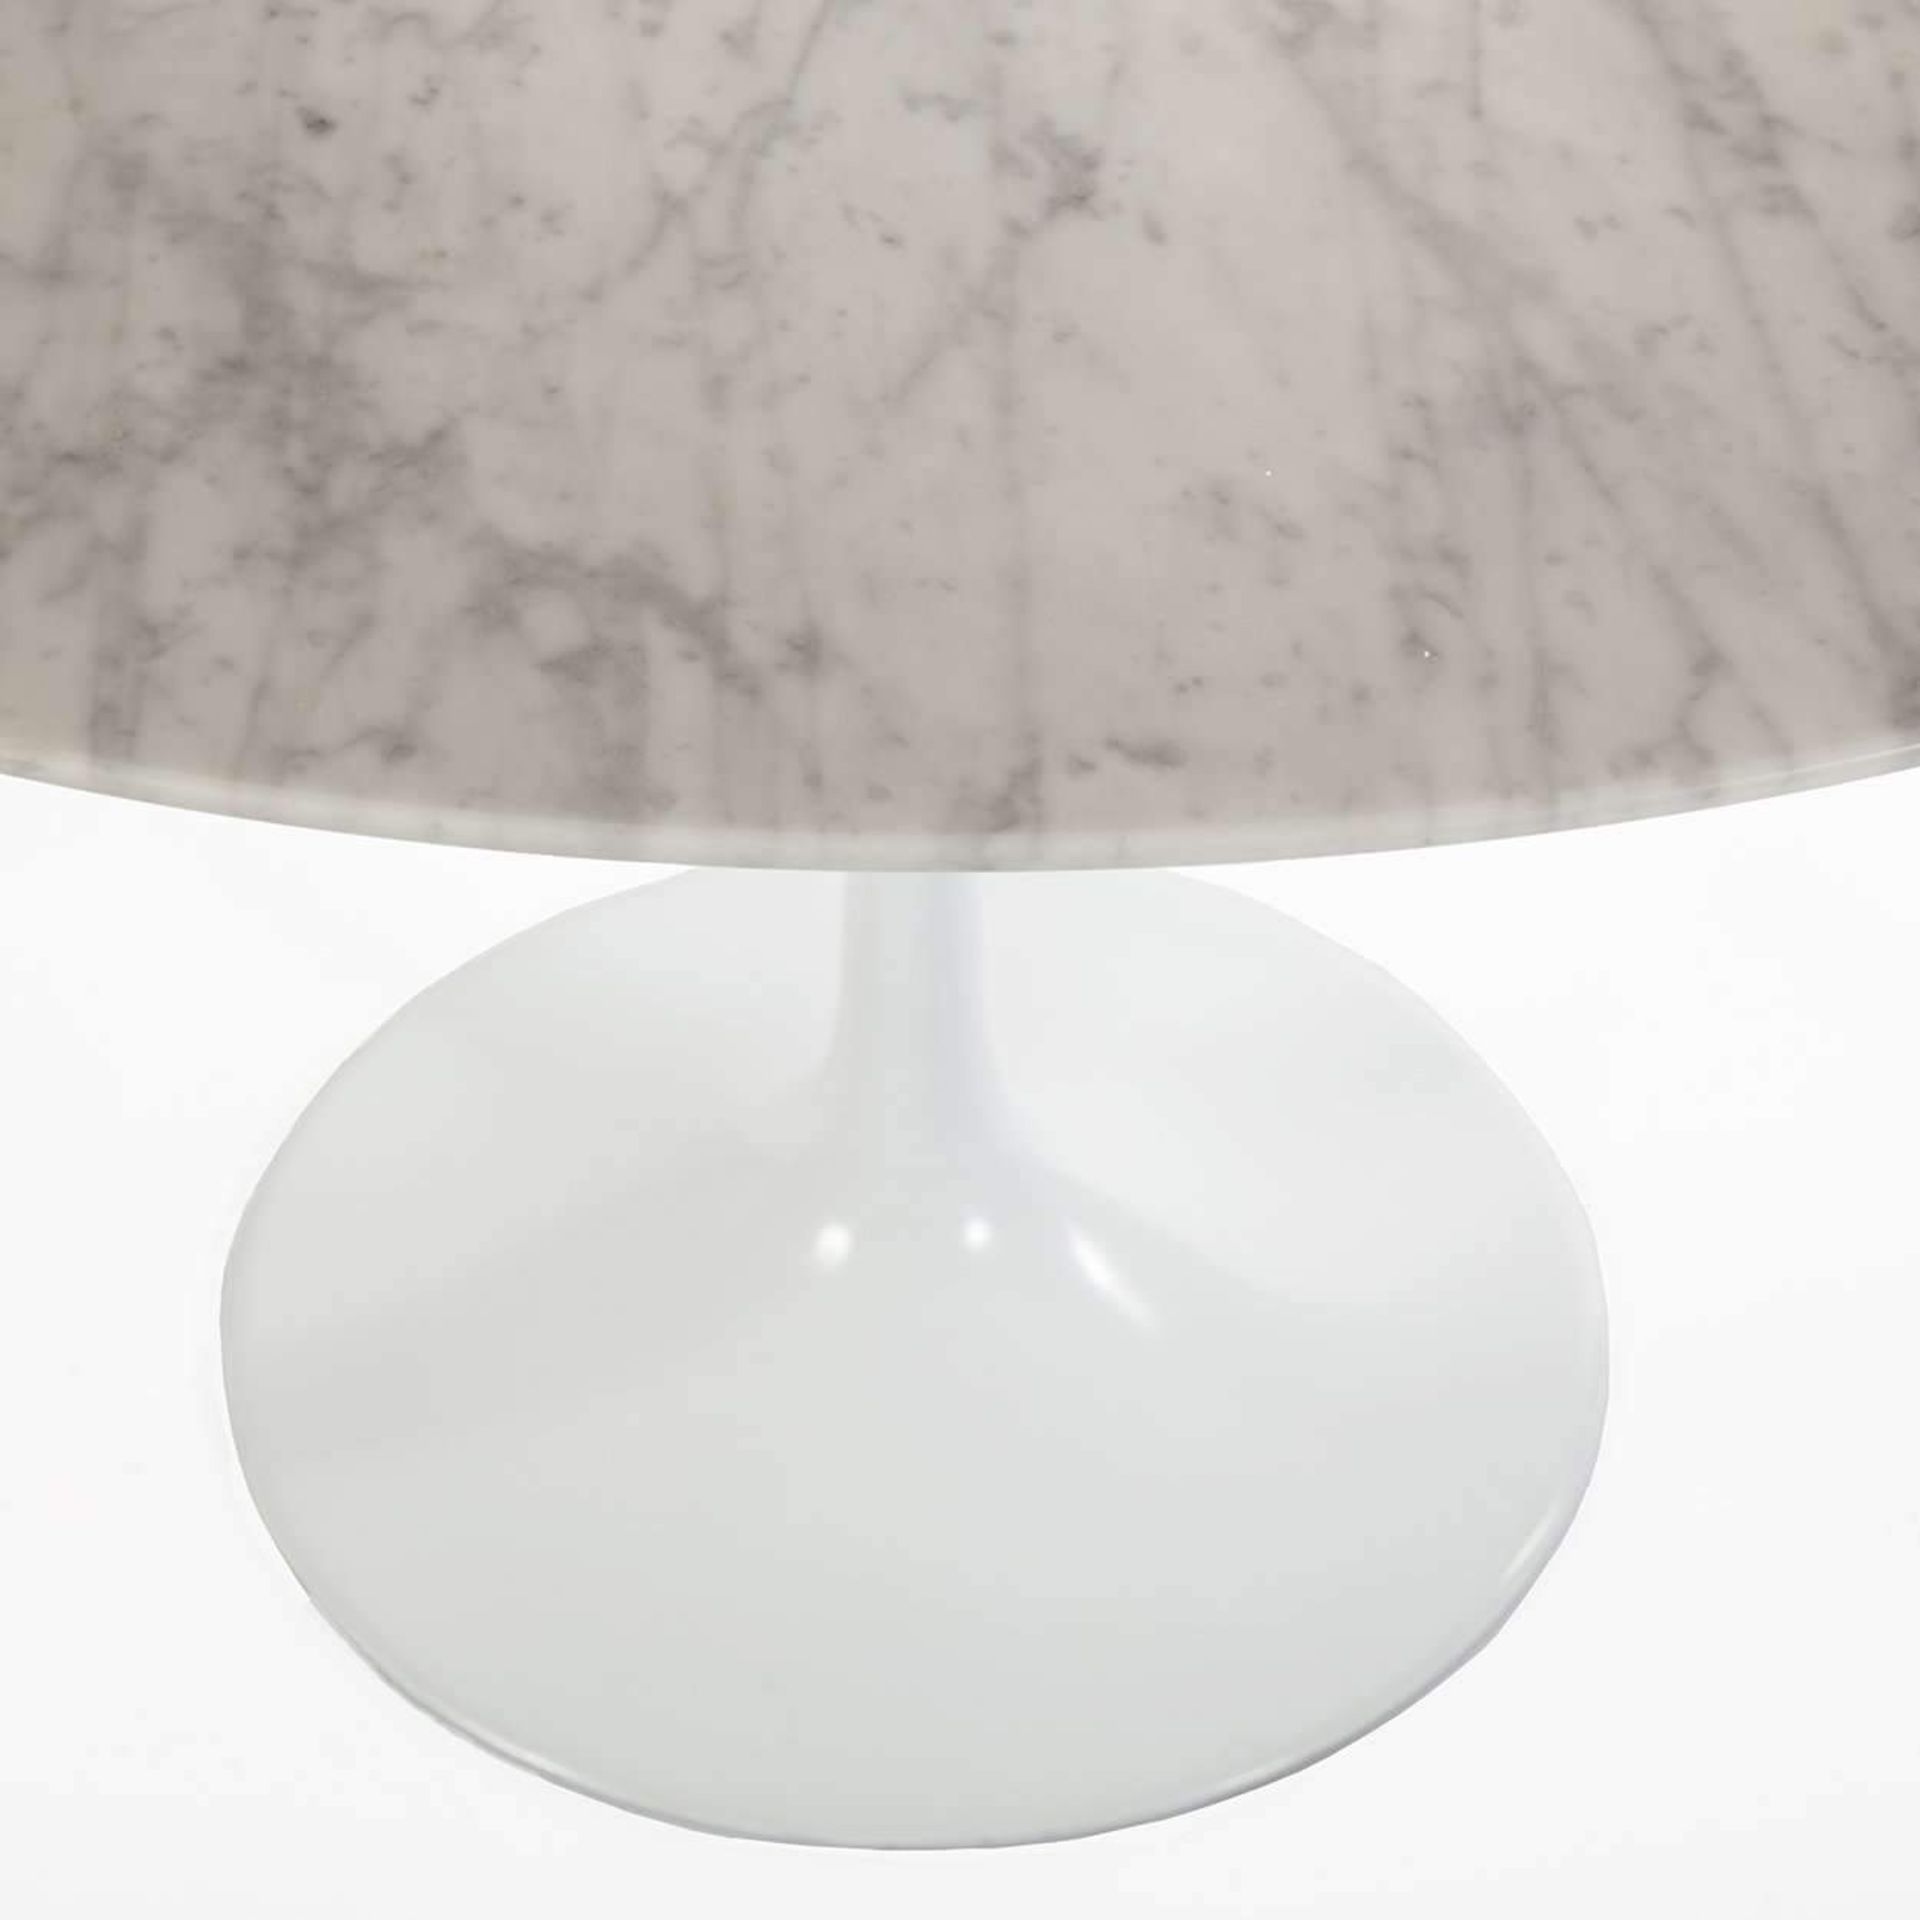 1 x Eero Saarinen Inspired Carrara Marble Tulip Dining Table - 1950's Reproduction Oval Dining Table - Image 4 of 5